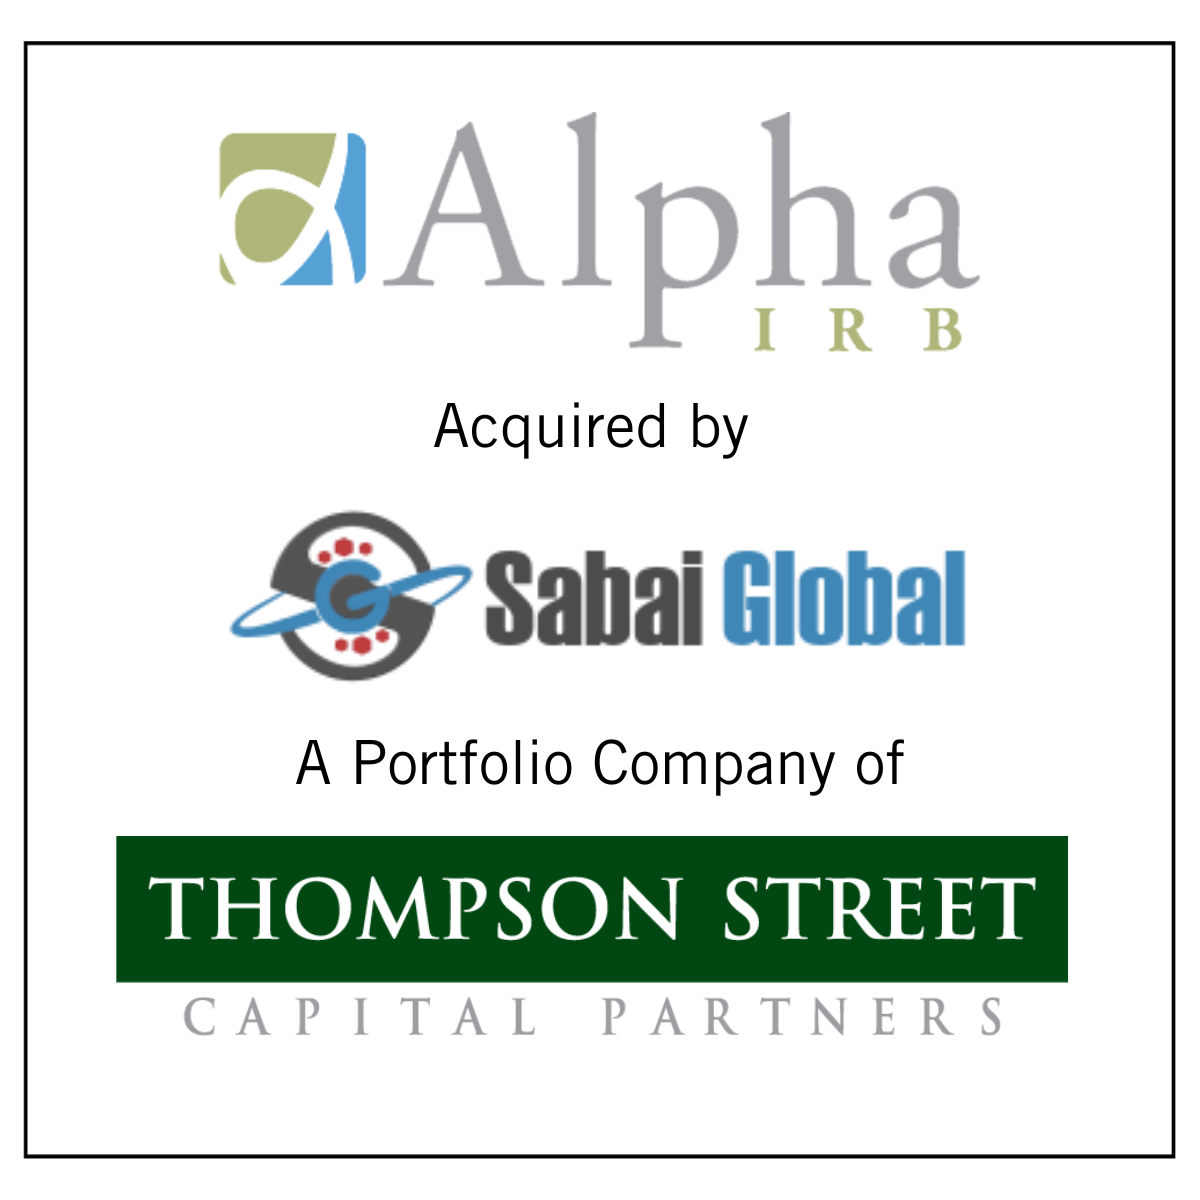 Alpha IRB Acquired by Sabai Global, a Portfolio Company of Thompson Street Capital, to Expand IRB Capabilities